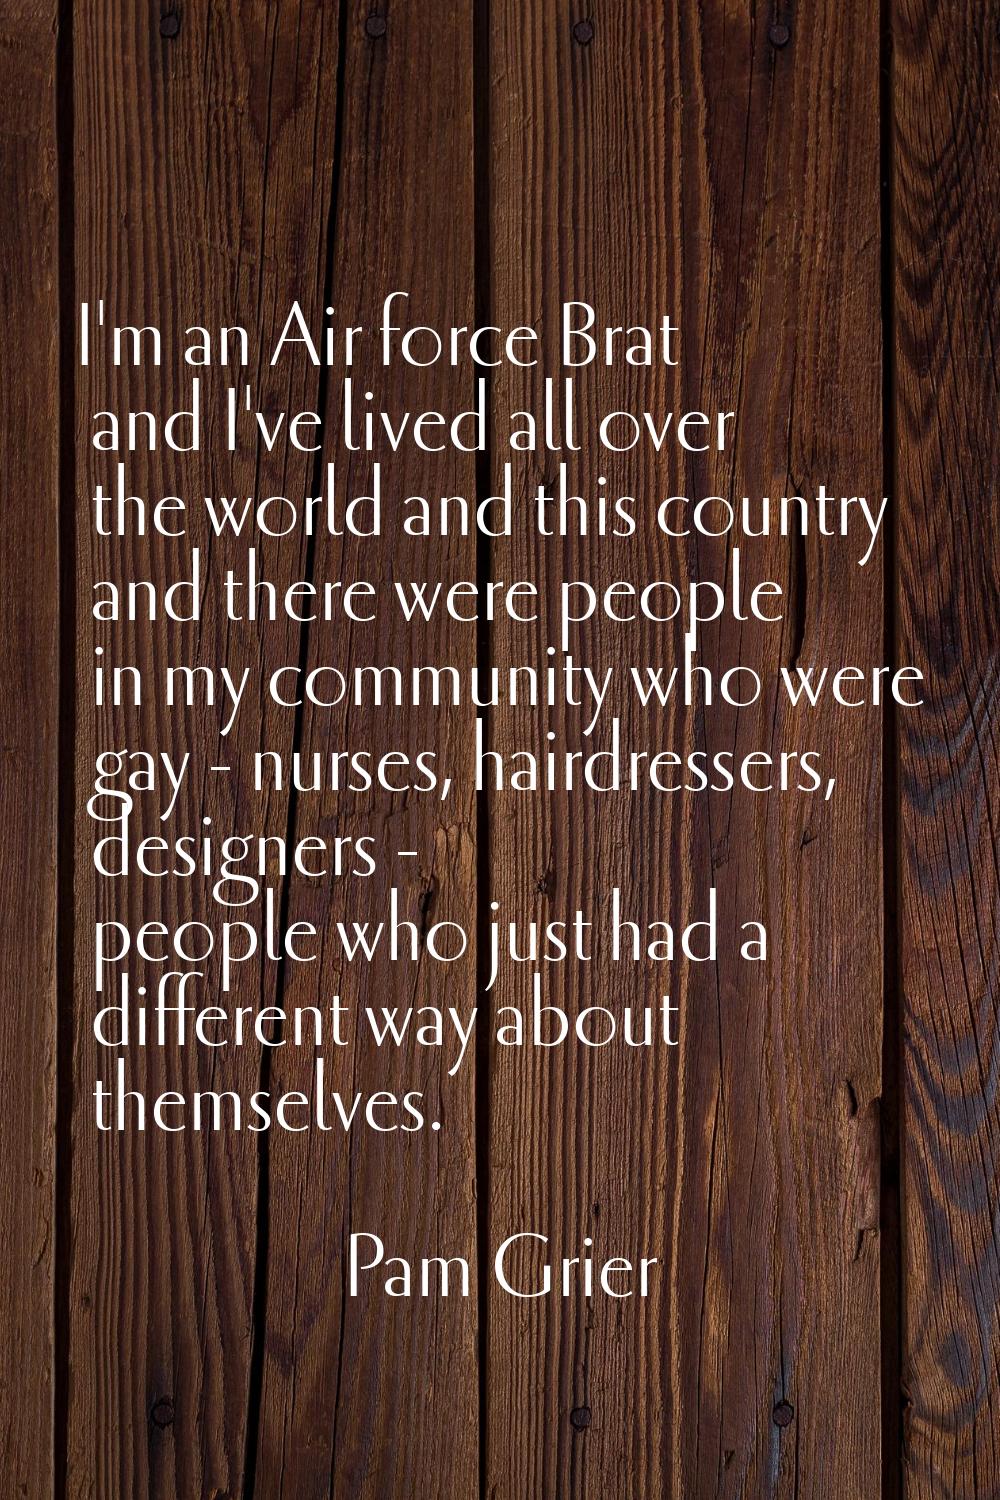 I'm an Air force Brat and I've lived all over the world and this country and there were people in m